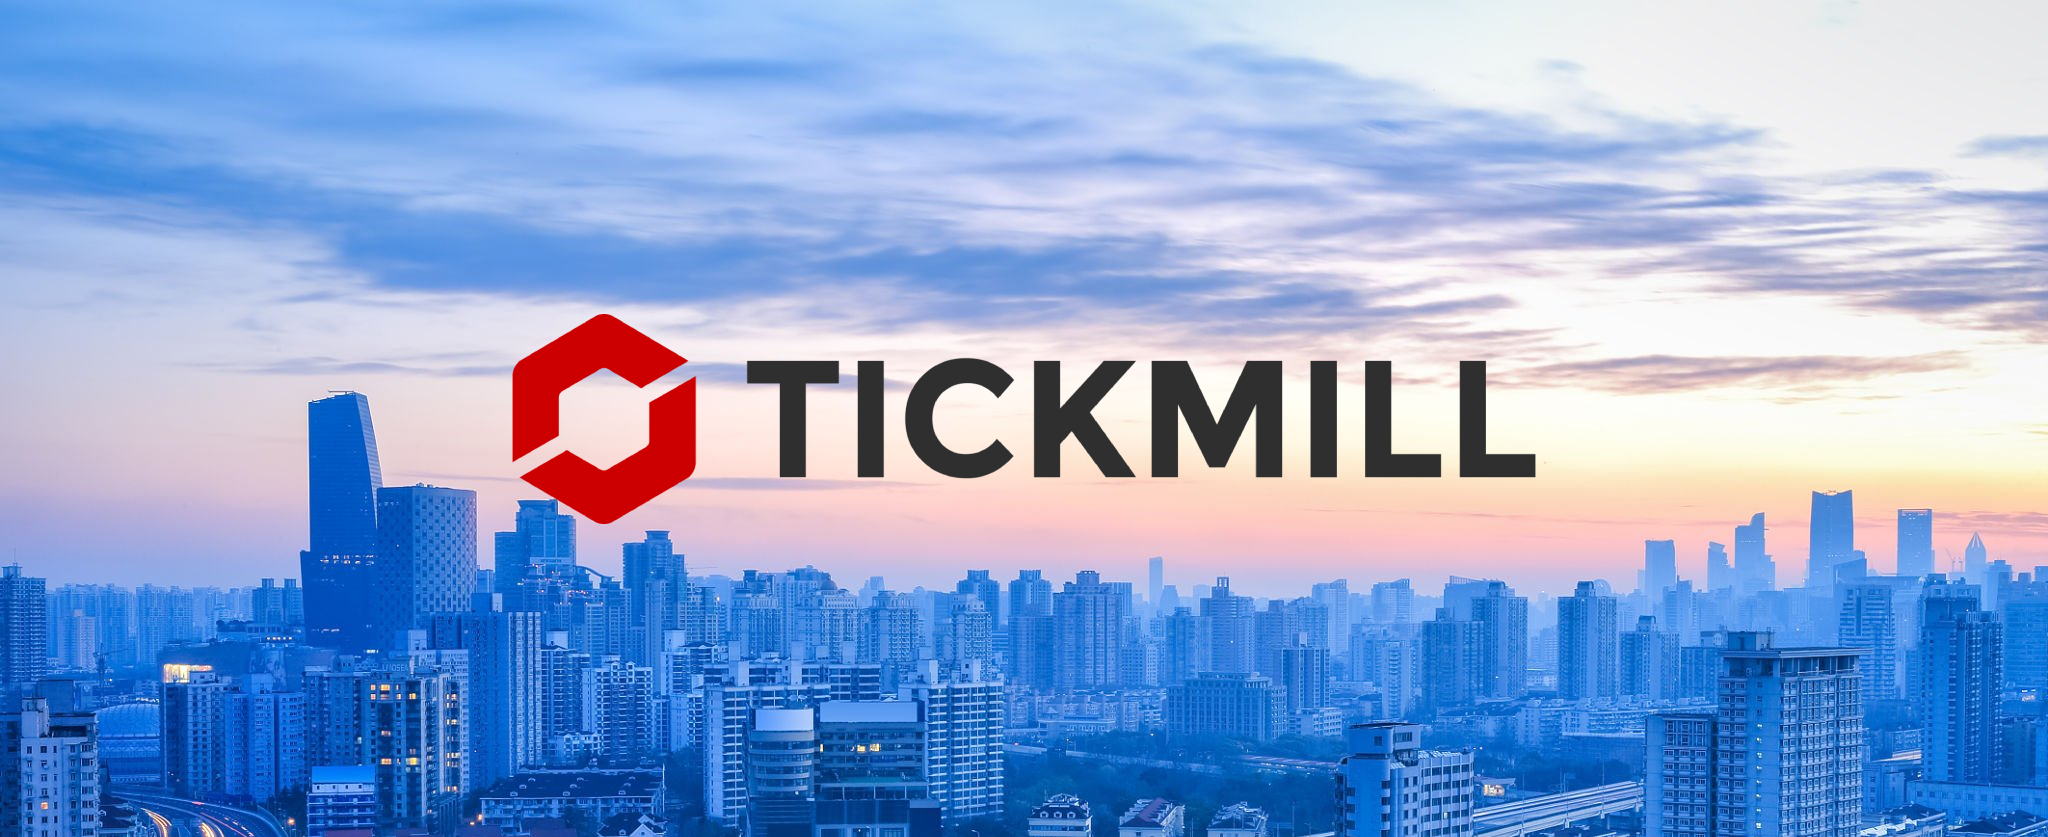 Tickmill unveiled a new product paying interest of up to 3.5% per year on clients' unused trading account funds in major currencies.